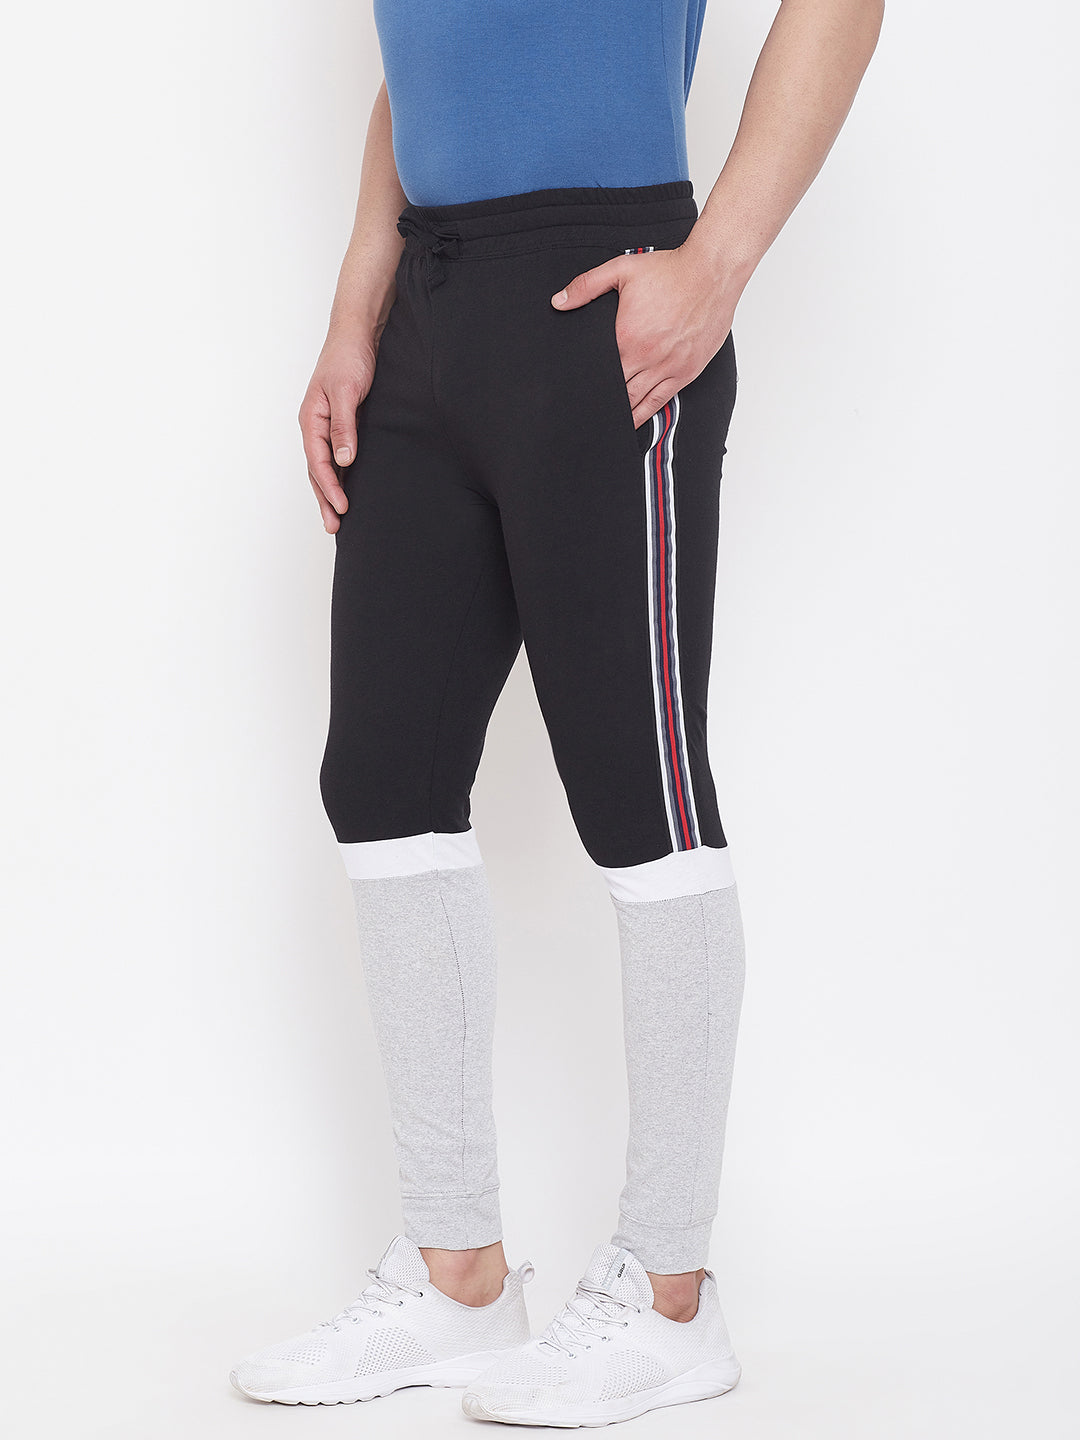 Black/Grey Melange/White Mid - Rise Slim Fit Joggers With Color Block